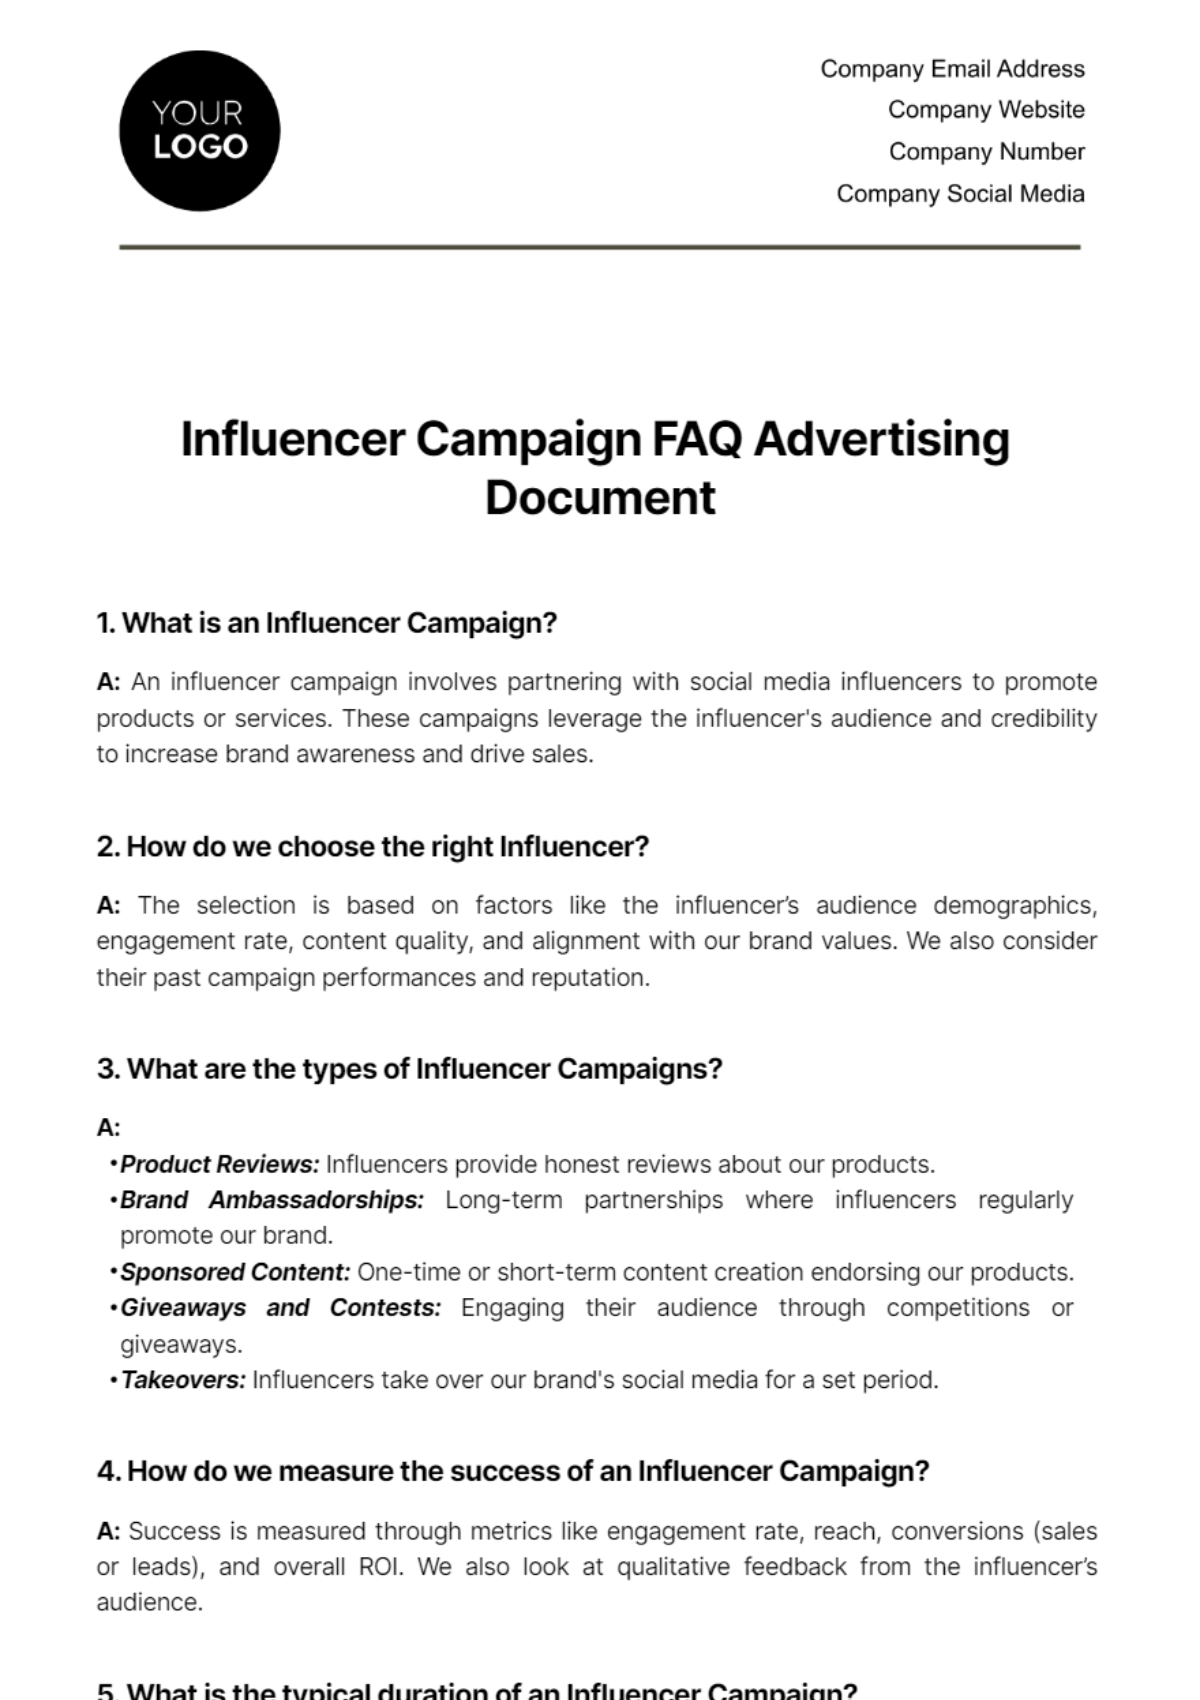 Free Influencer Campaign FAQ Advertising Document Template